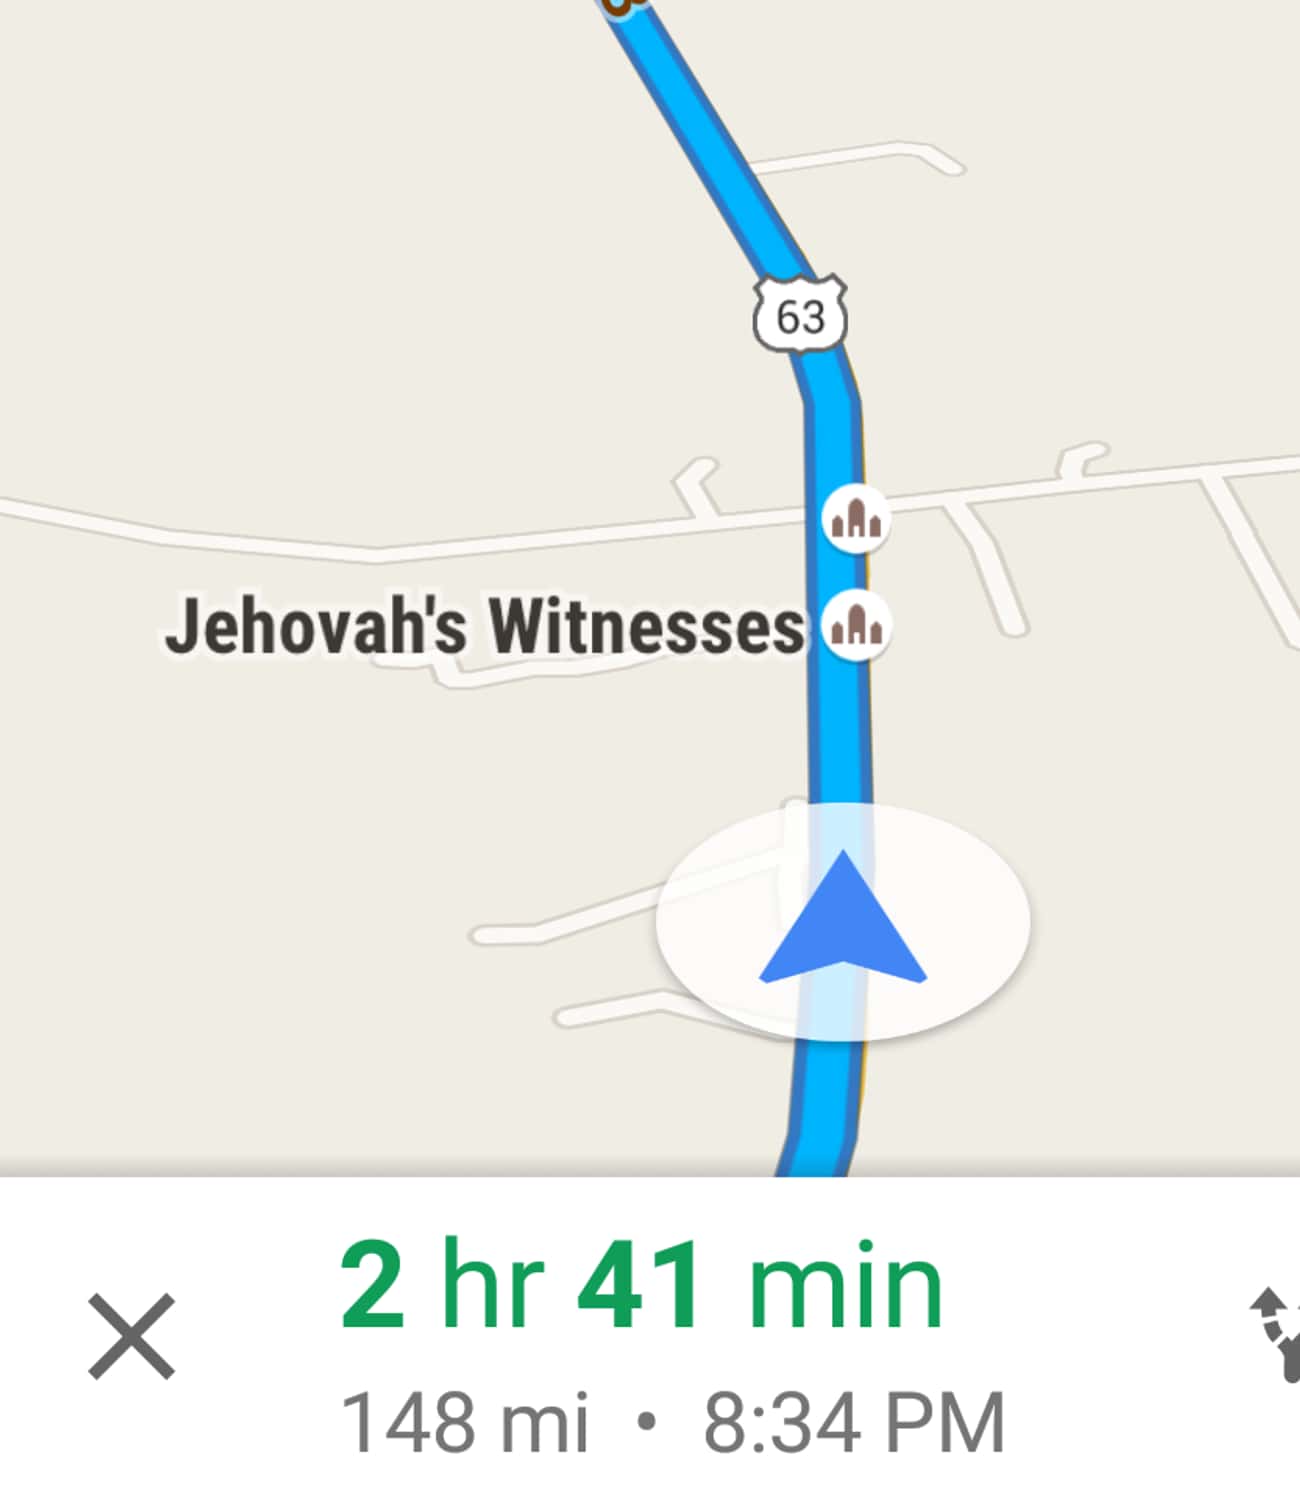 Thanks for the Heads up, Google Maps